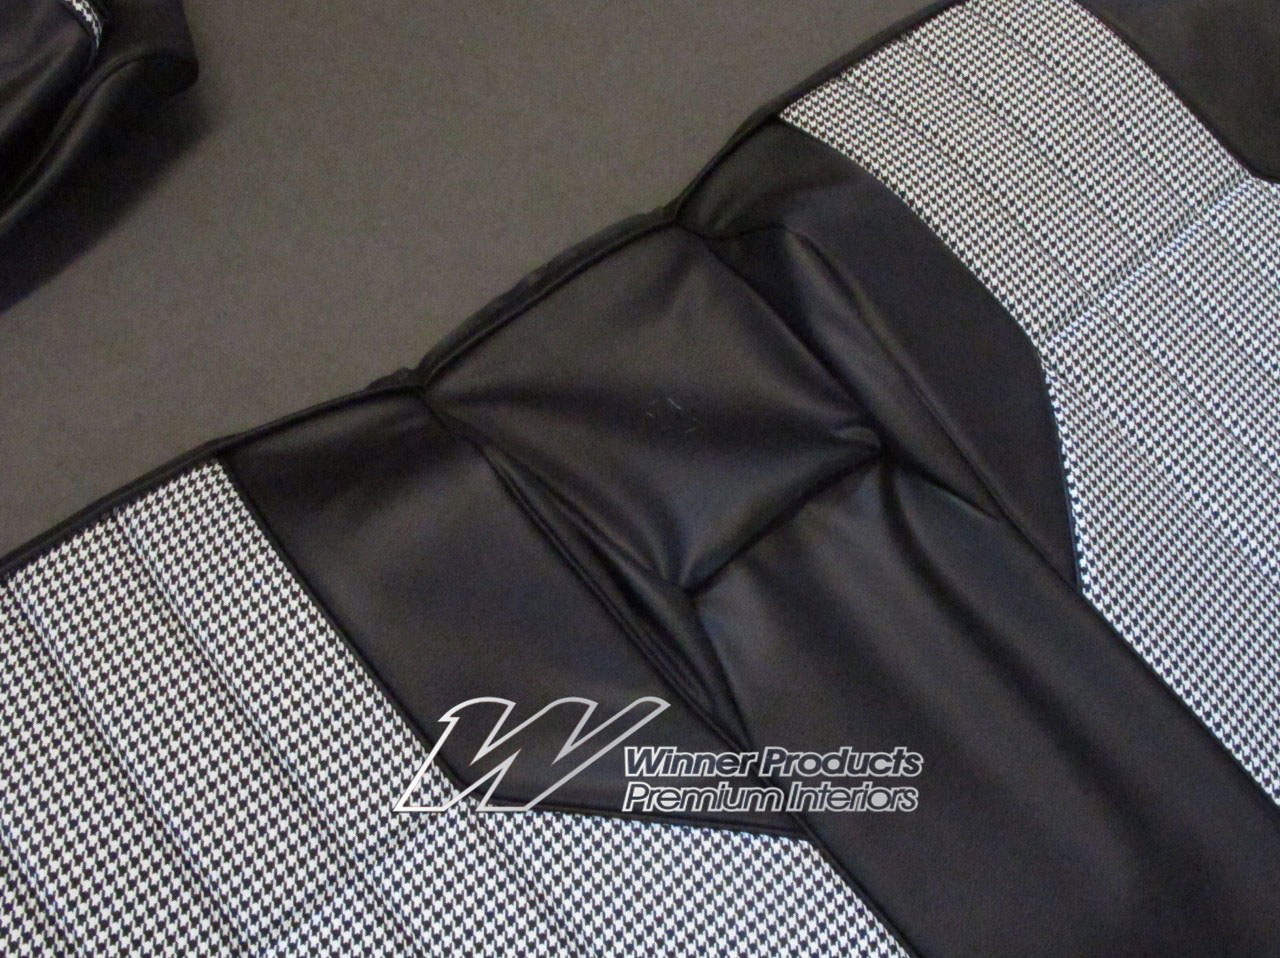 Holden Monaro HT Monaro GTS Coupe 10Y Black & Houndstooth Seat Covers (Image 5 of 6)